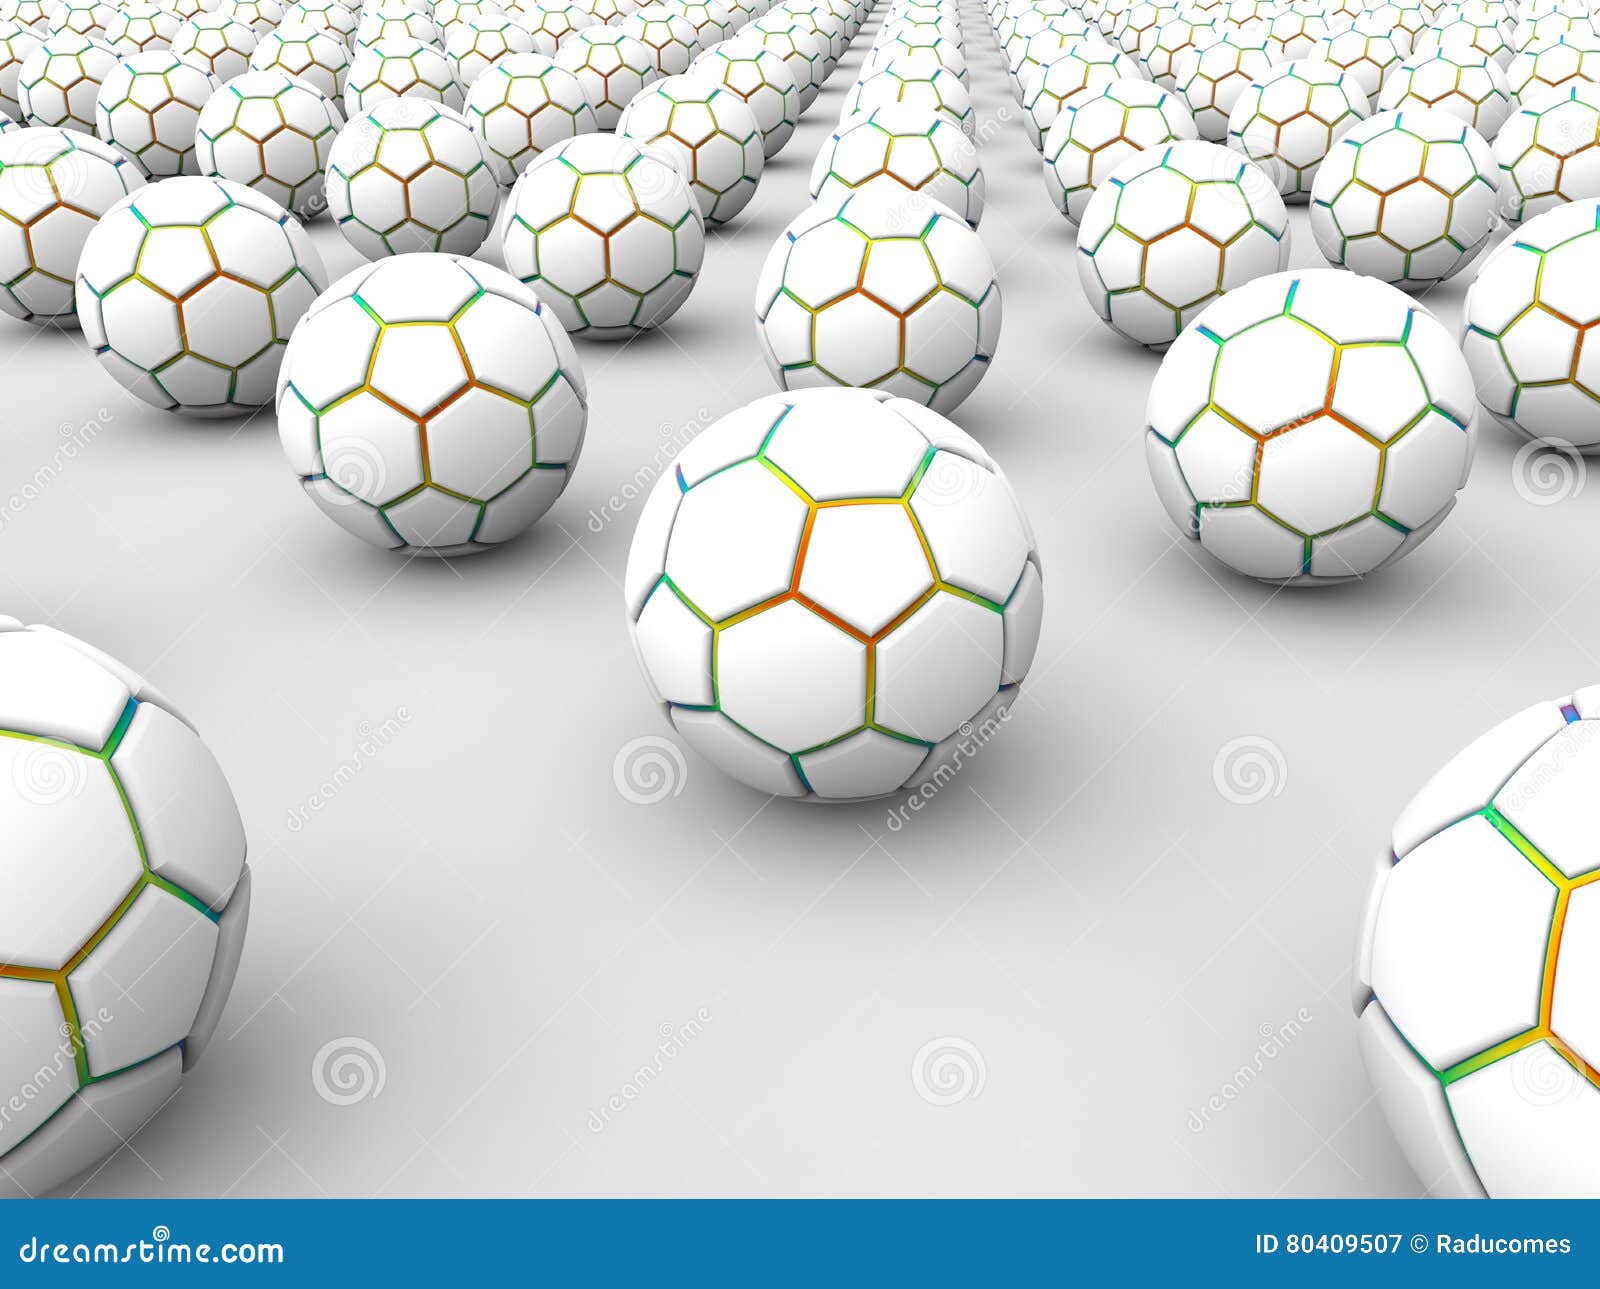 62,474 8 Ball Images, Stock Photos, 3D objects, & Vectors